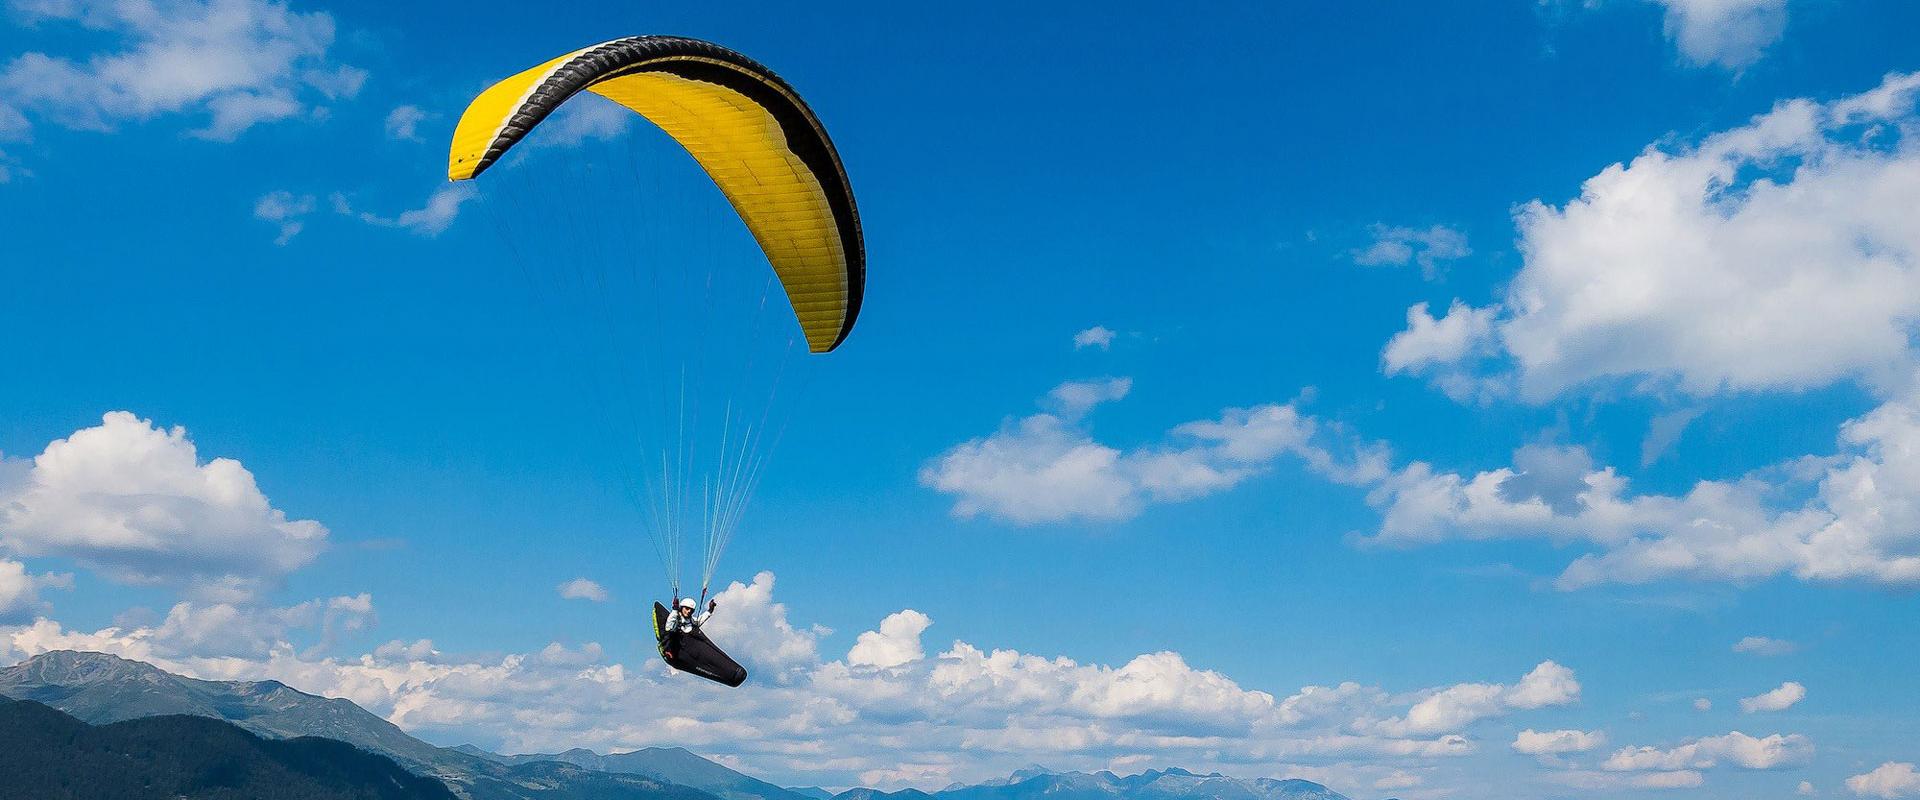  paragliding tandem experience on Sibillini Mountains